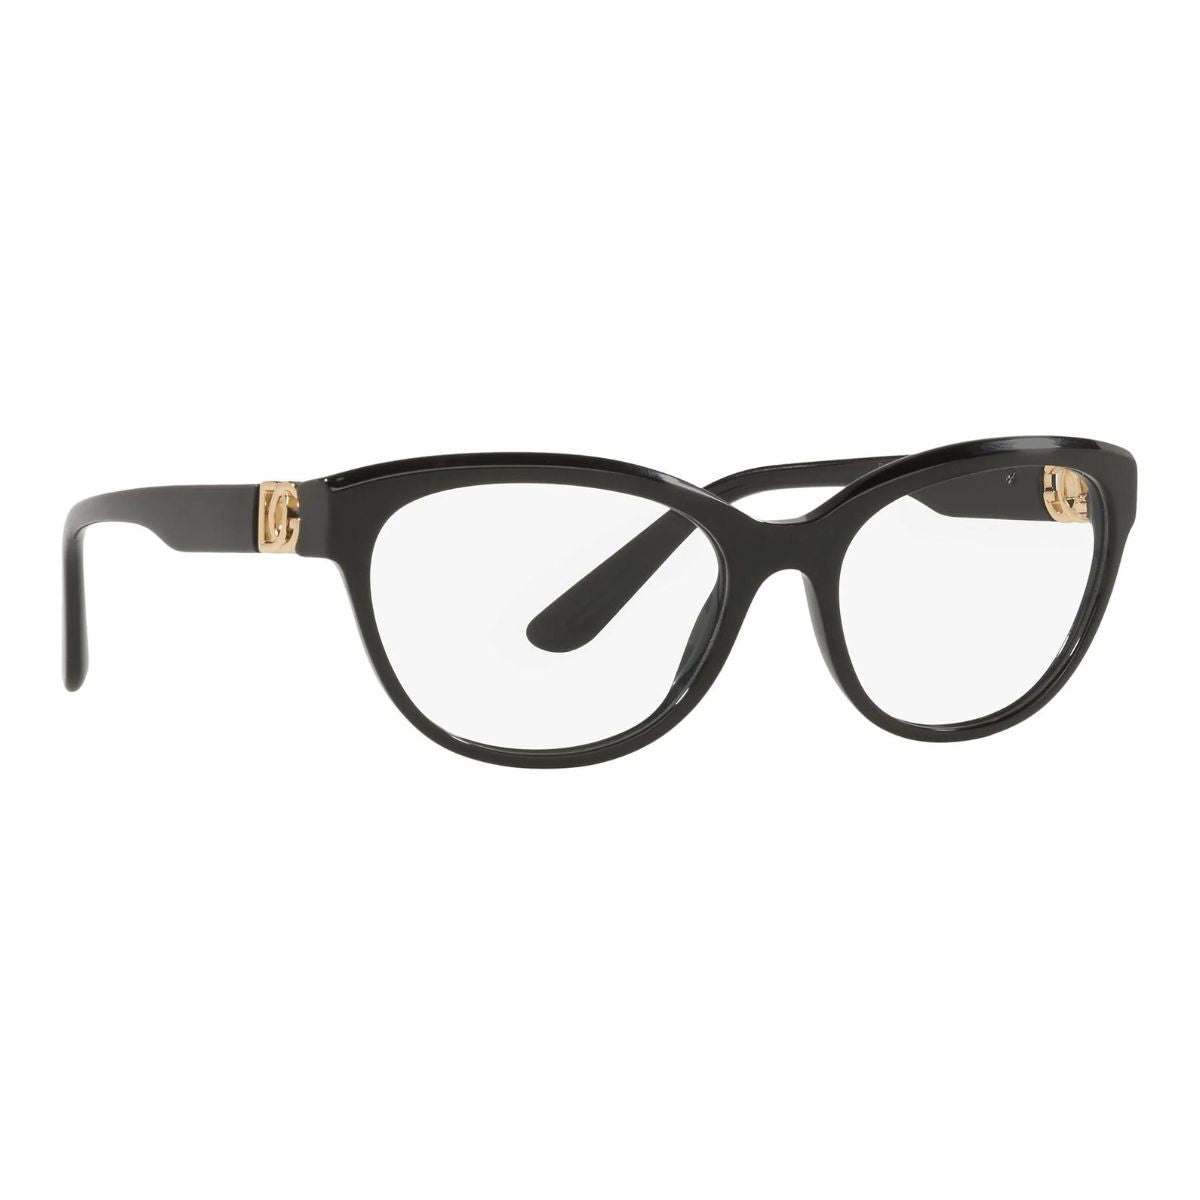 "best Dolce&Gabbana 3342 501 spactacle frame for women's at optorium"